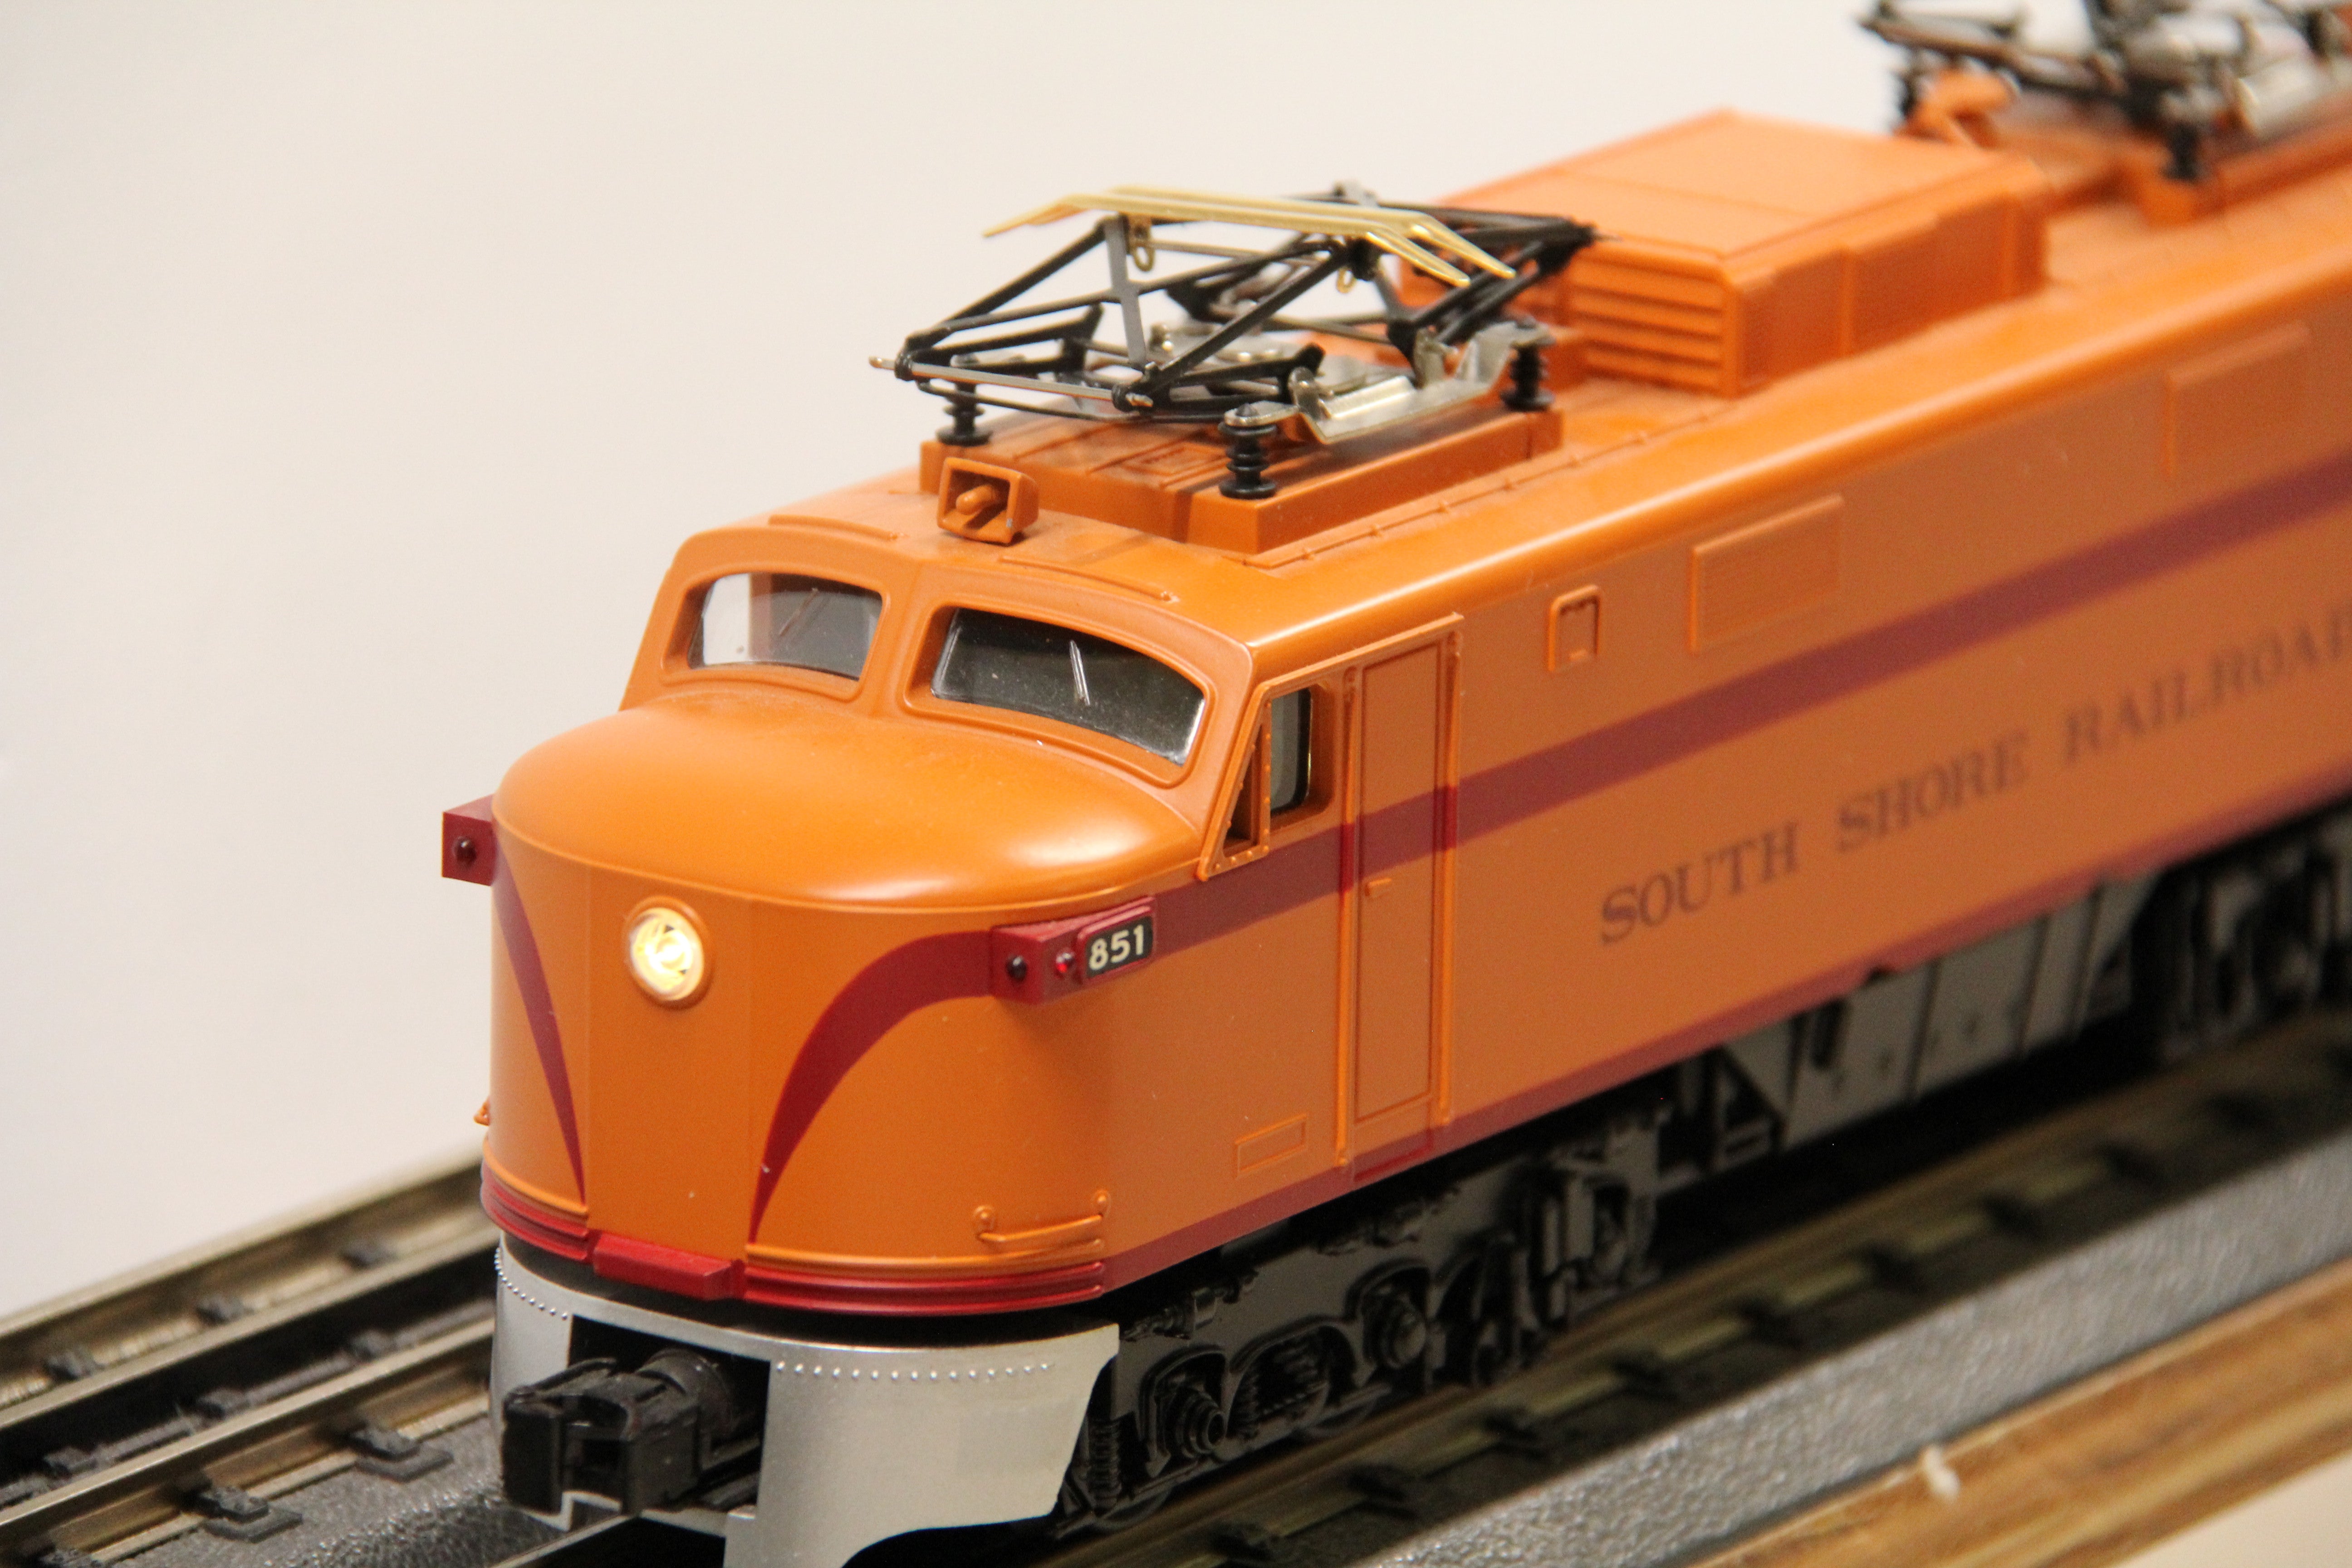 Rail King 30-5151-1 Chicago South Shore EP-5 Electric Engine-Second hand-M4128